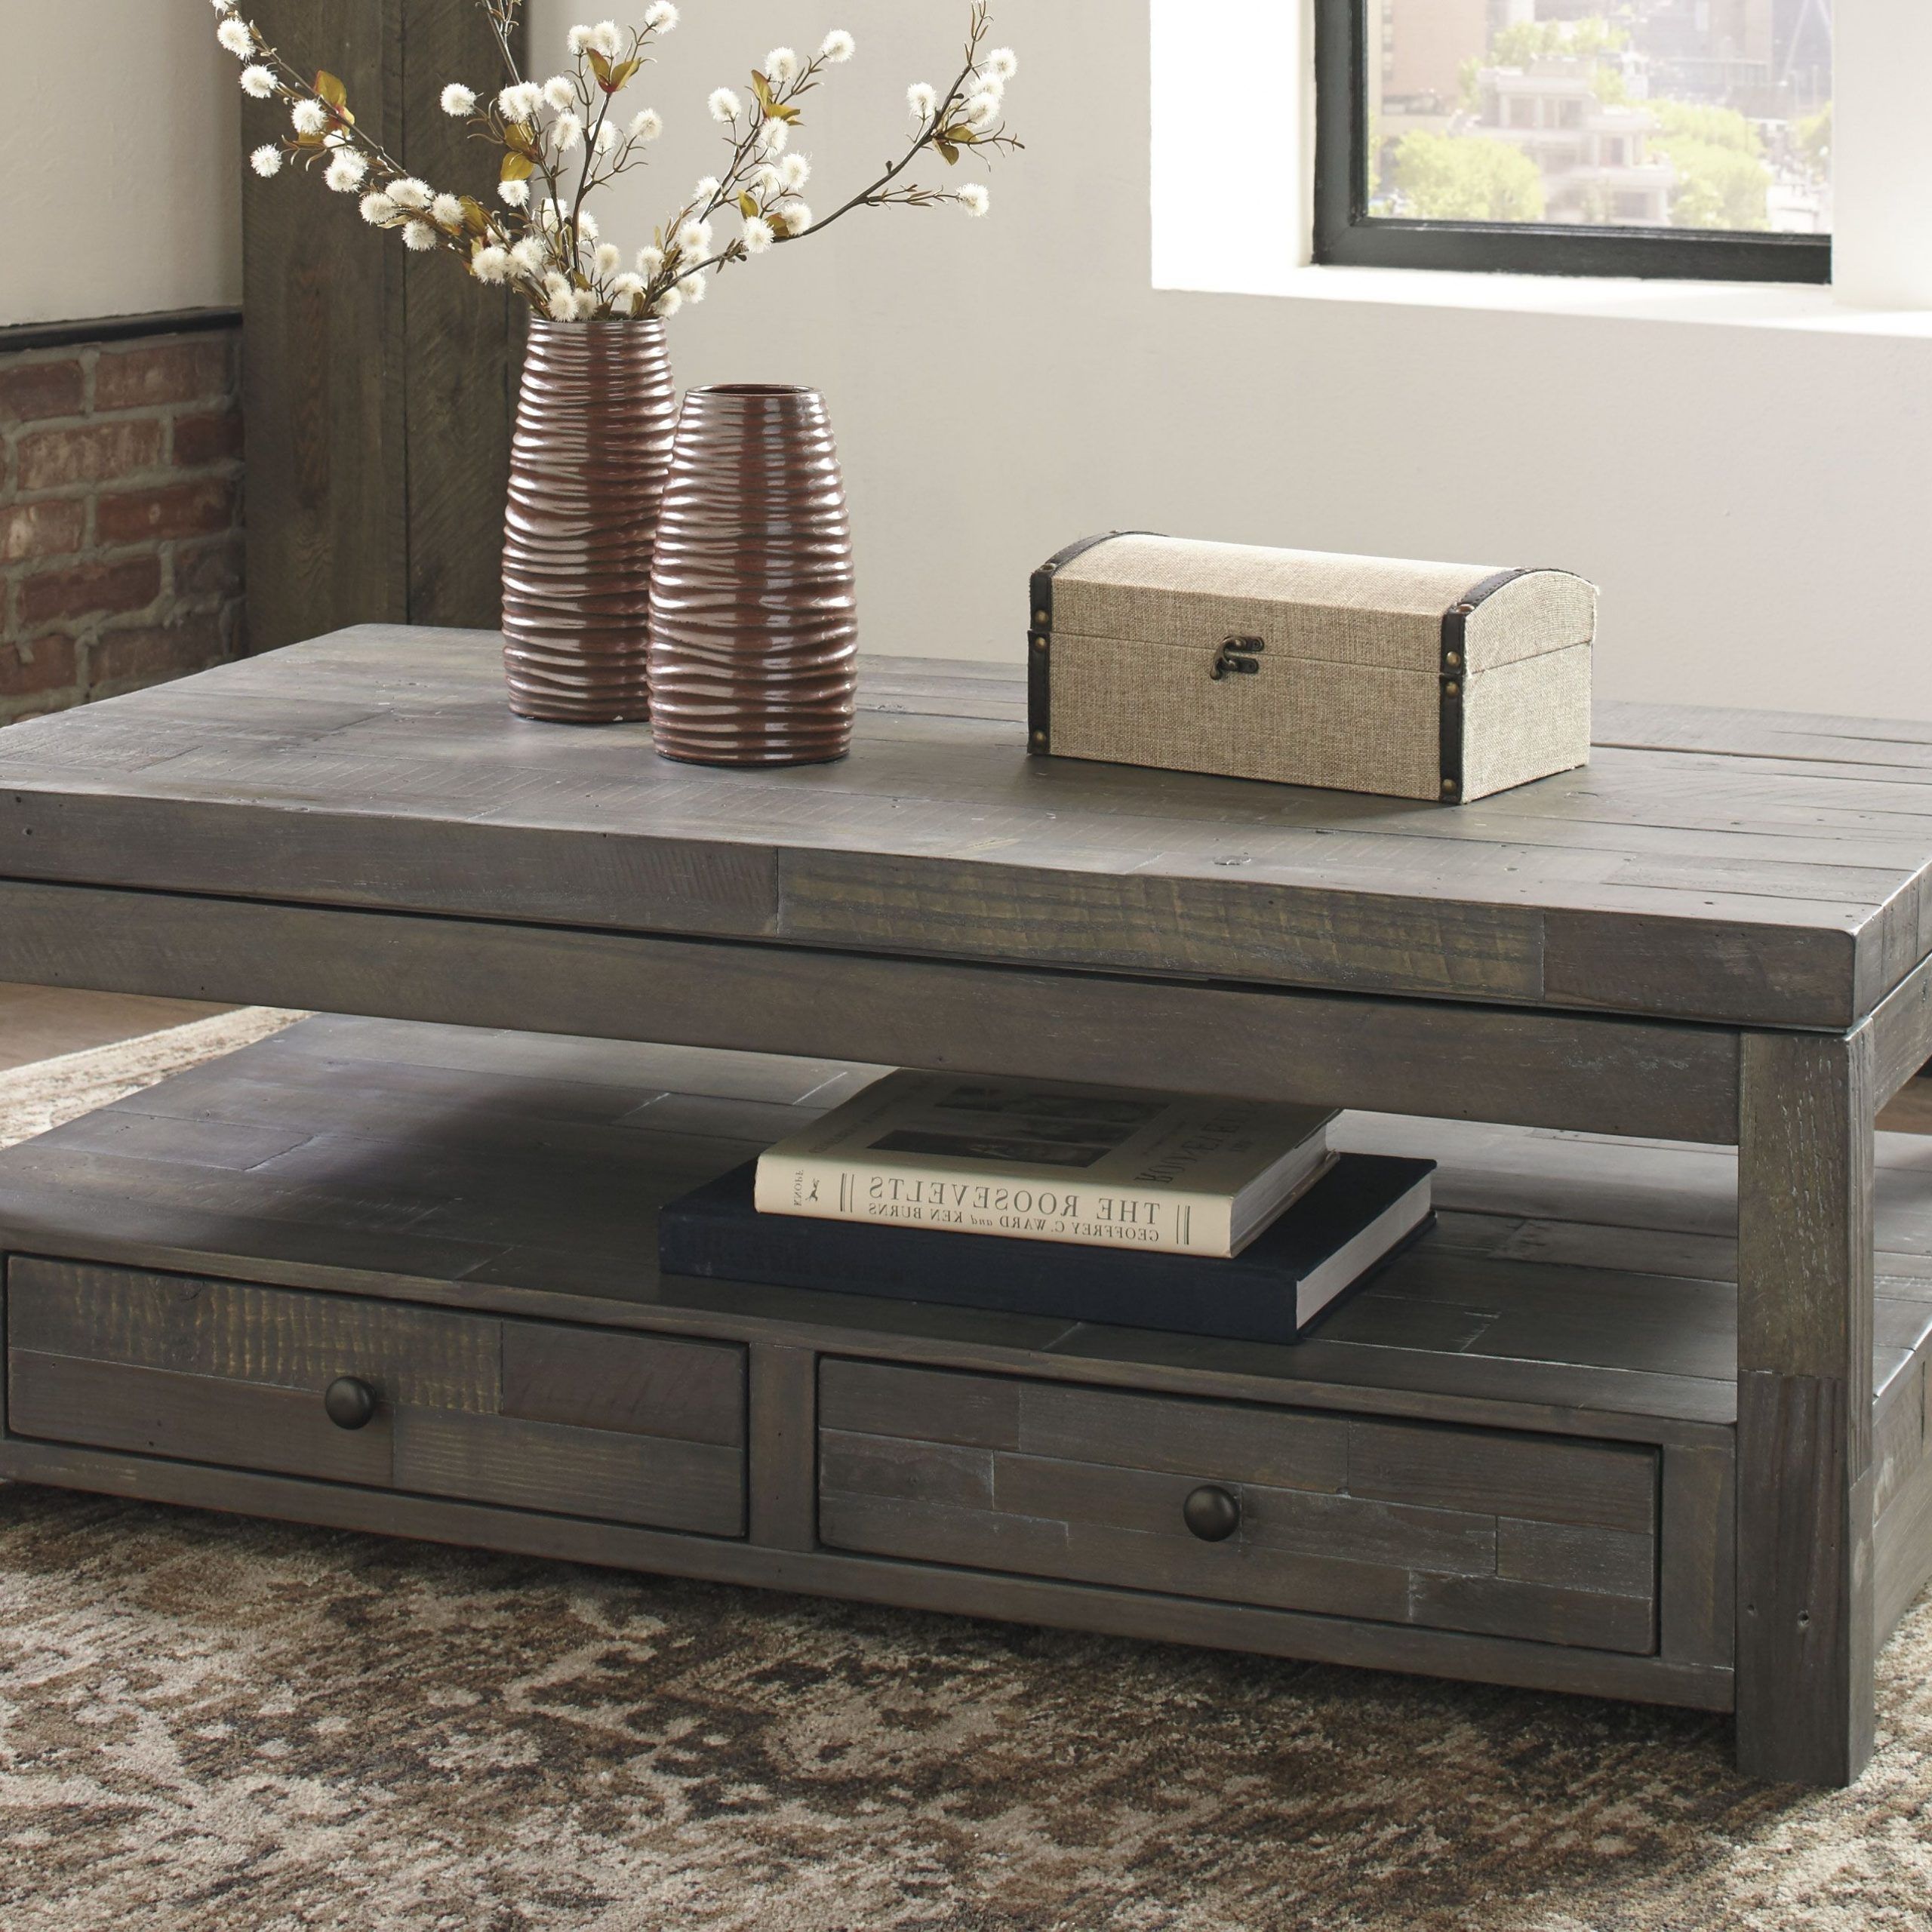 Daybrook Coffee Table With Lift Top, Gray (View 20 of 20)